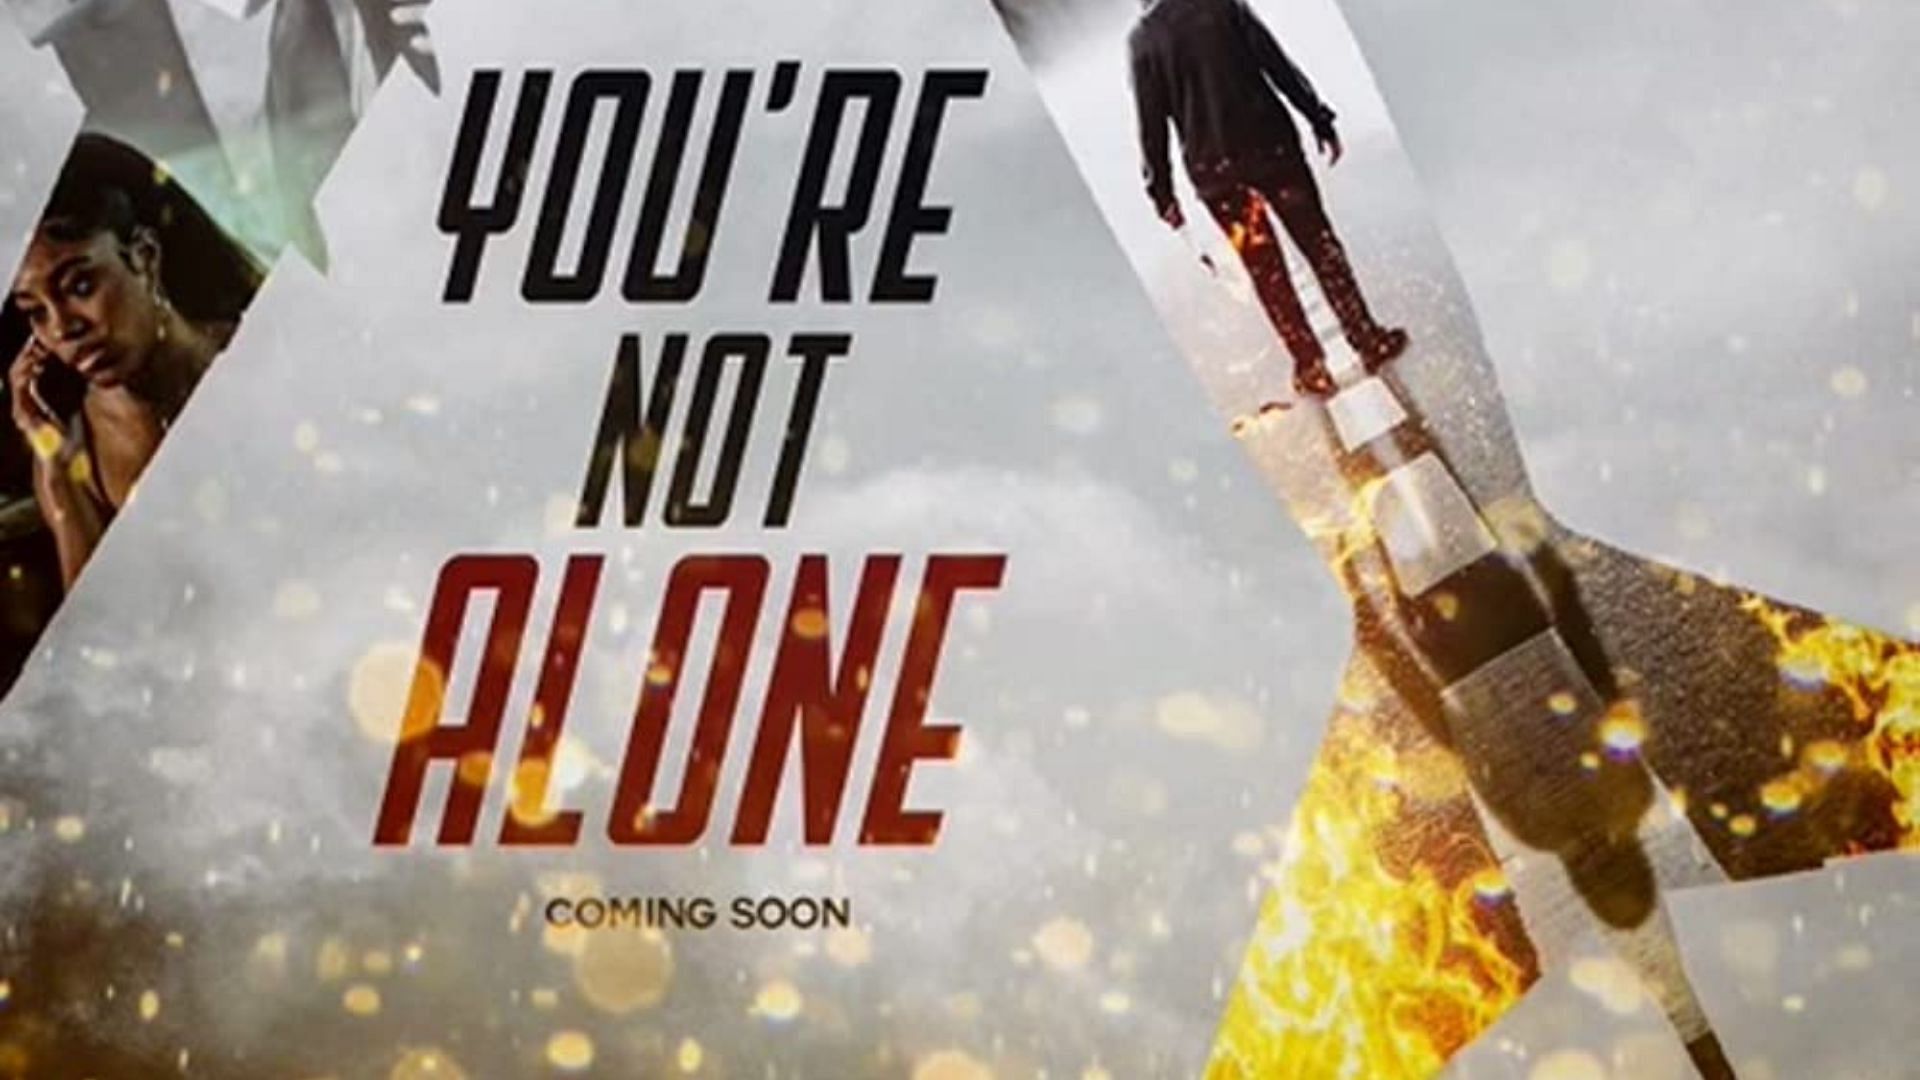 You're Not Alone on Tubi Release date, plot, cast, and everything we